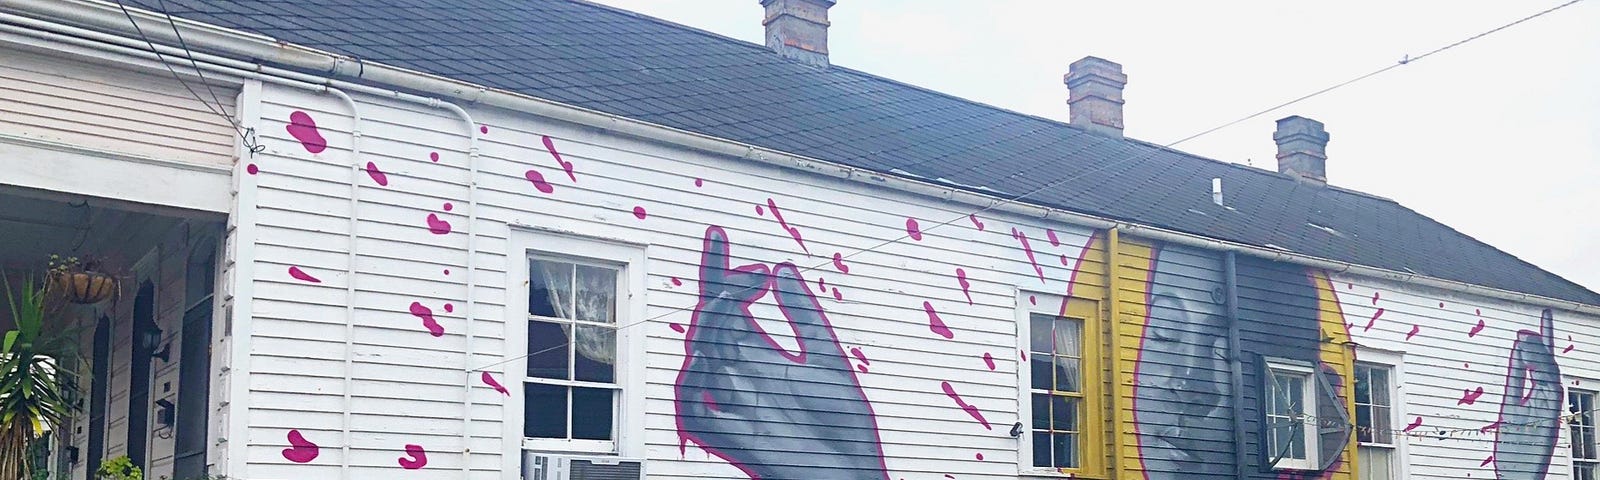 Long, white clapboard house with 3 chimneys, the side is covered by a painting of the upper body of a black woman — eyes closed, hand reaching up to pluck a miracle, a blue butterfly at her throat chakra, and a gold halo behind her head.